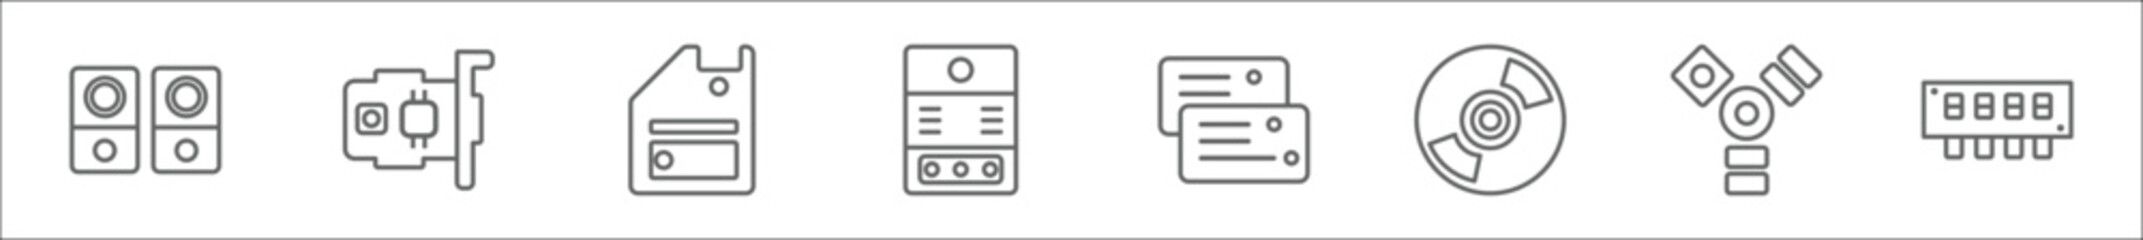 outline set of hardware line icons. linear vector icons such as two stereo speakers, gpu, floppy disk upside down, computer case, flash card, cd room, firewire, random access memory